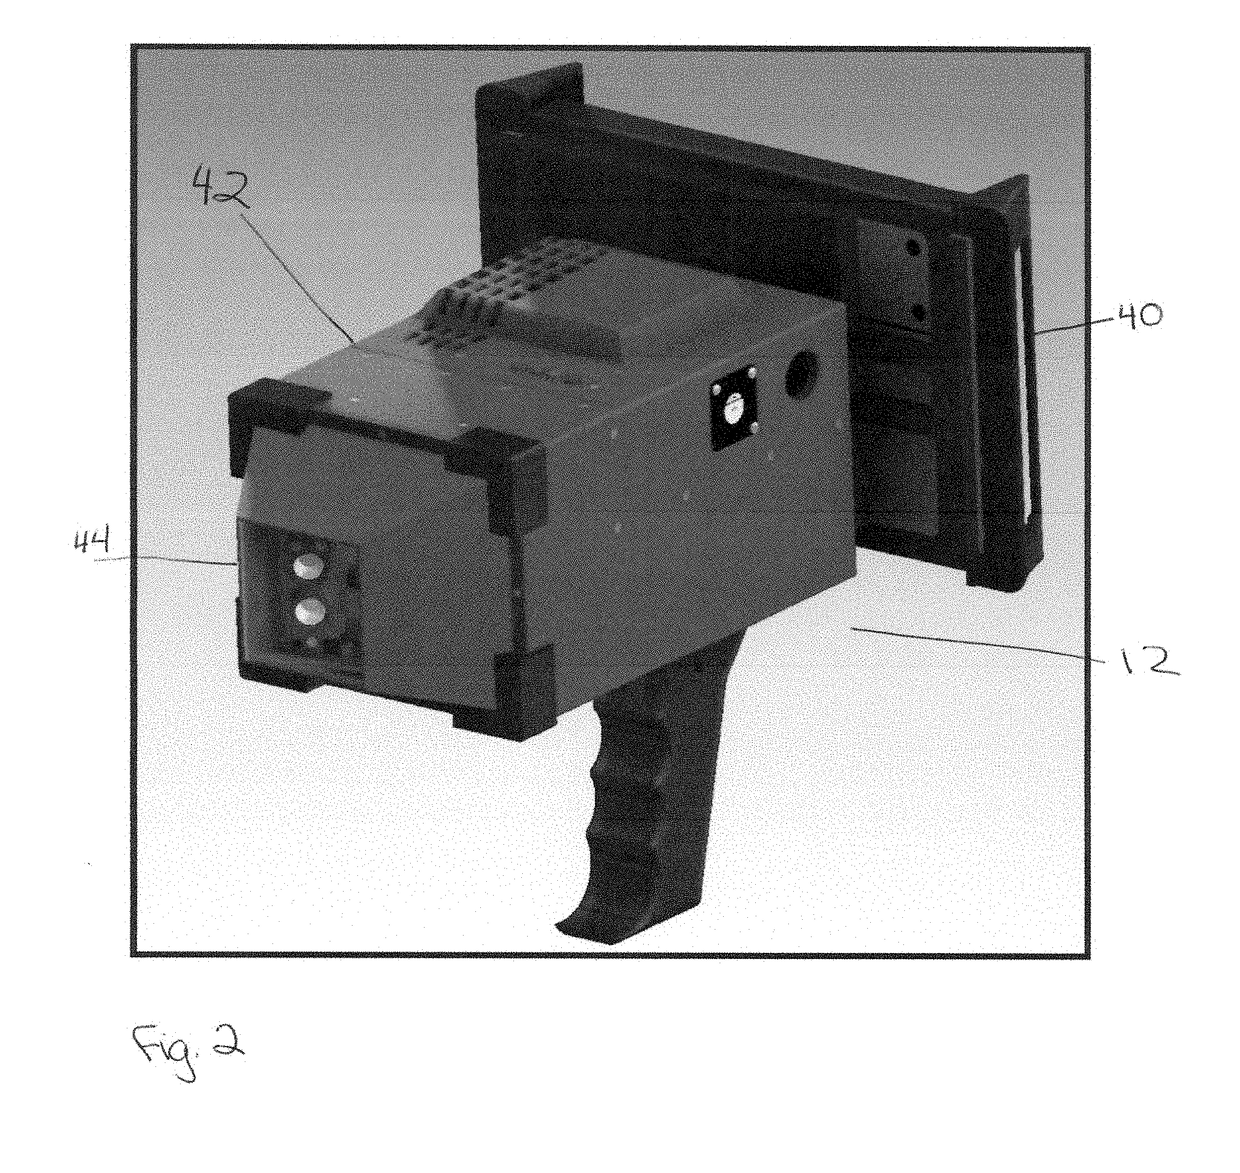 Infrared detection camera